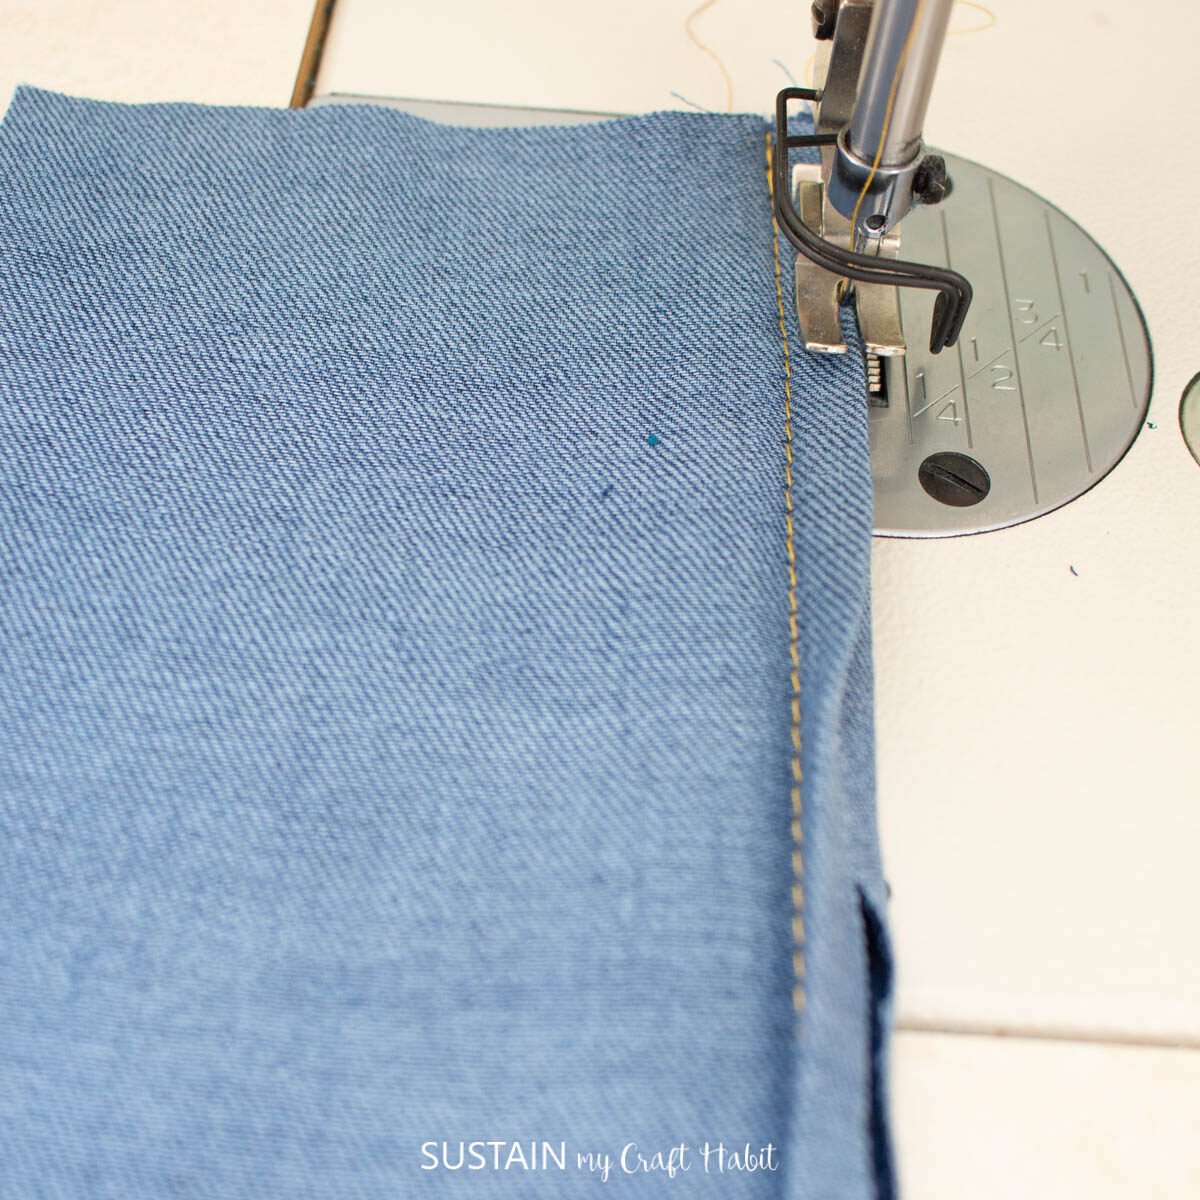 Stitch the folded edges together with a sewing machine.